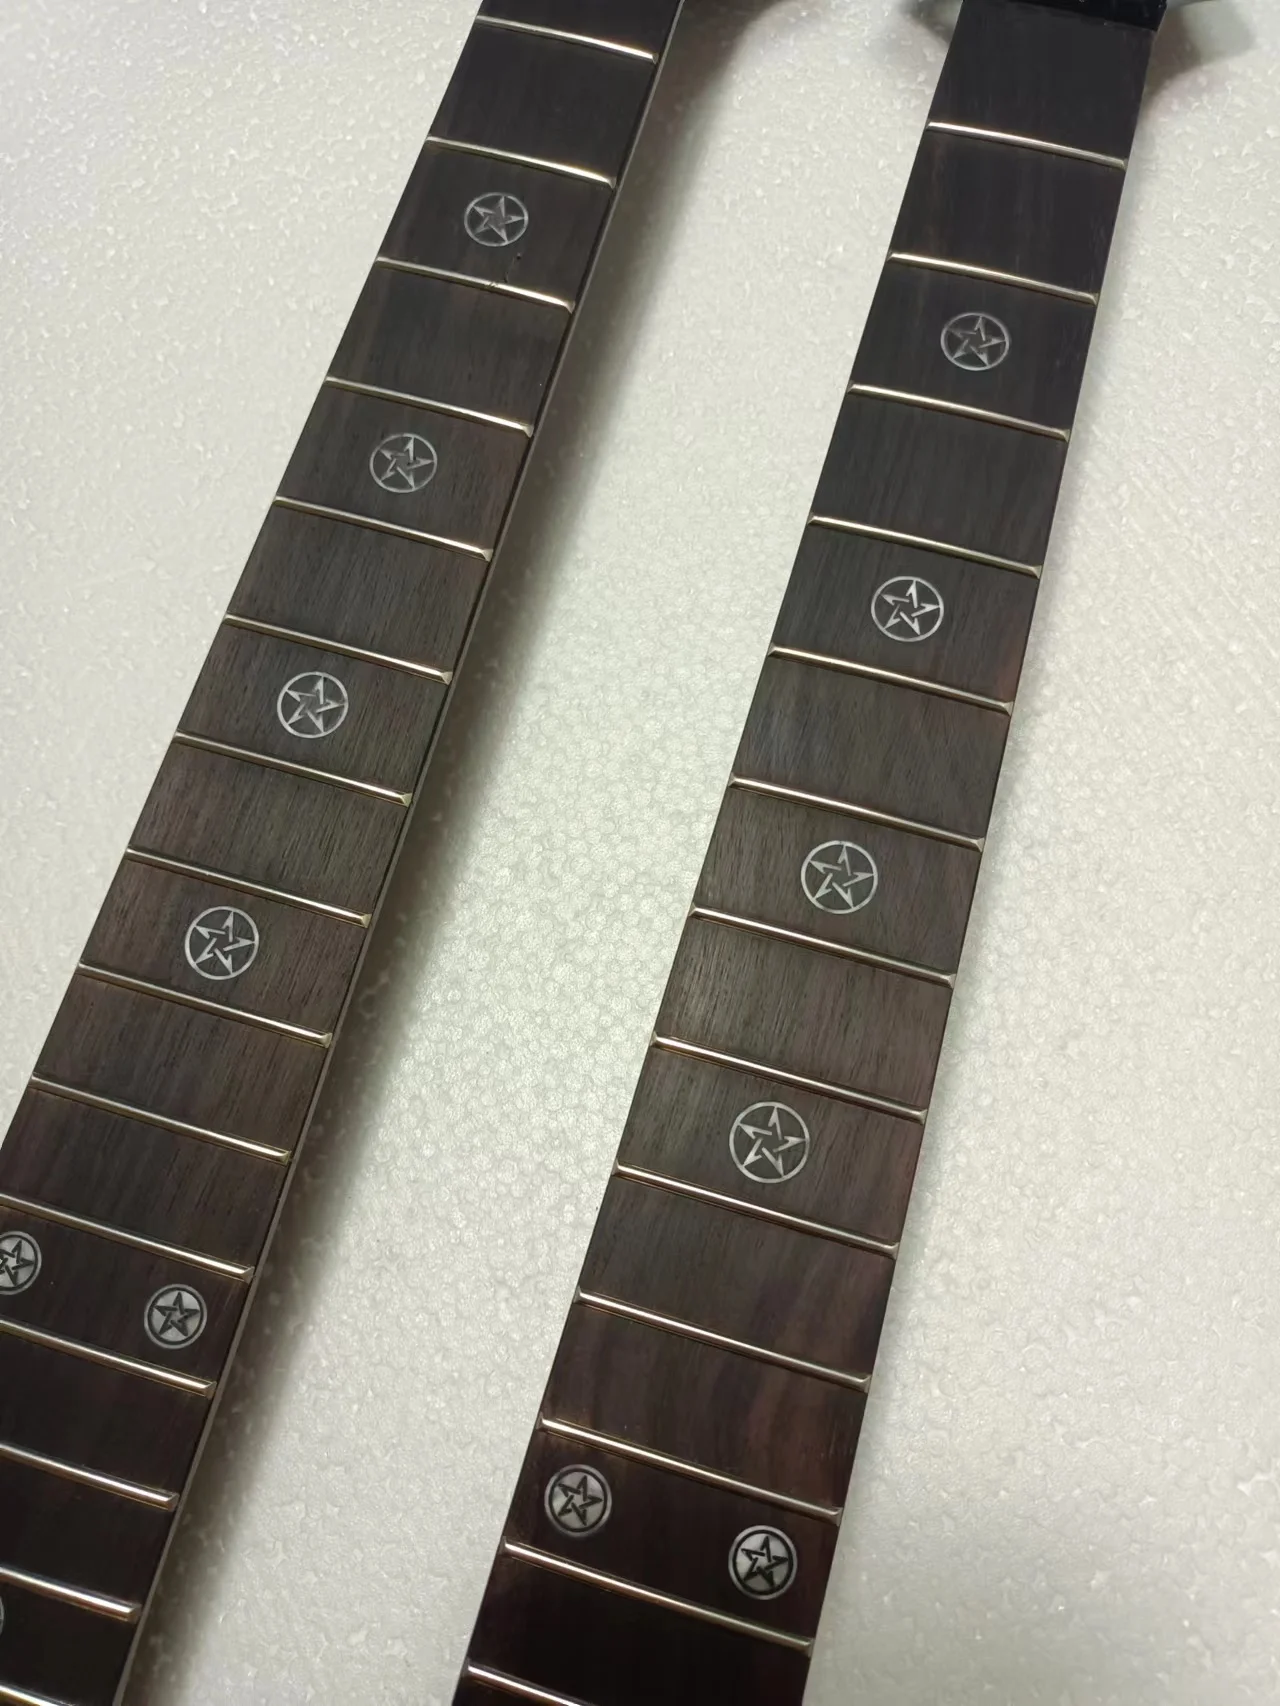 24 Fret Electric Guitar Neck Fashionable Star Inlay Rosewood Fingerboard For DIY Replacement(1pc, Free Logo Service) enlarge